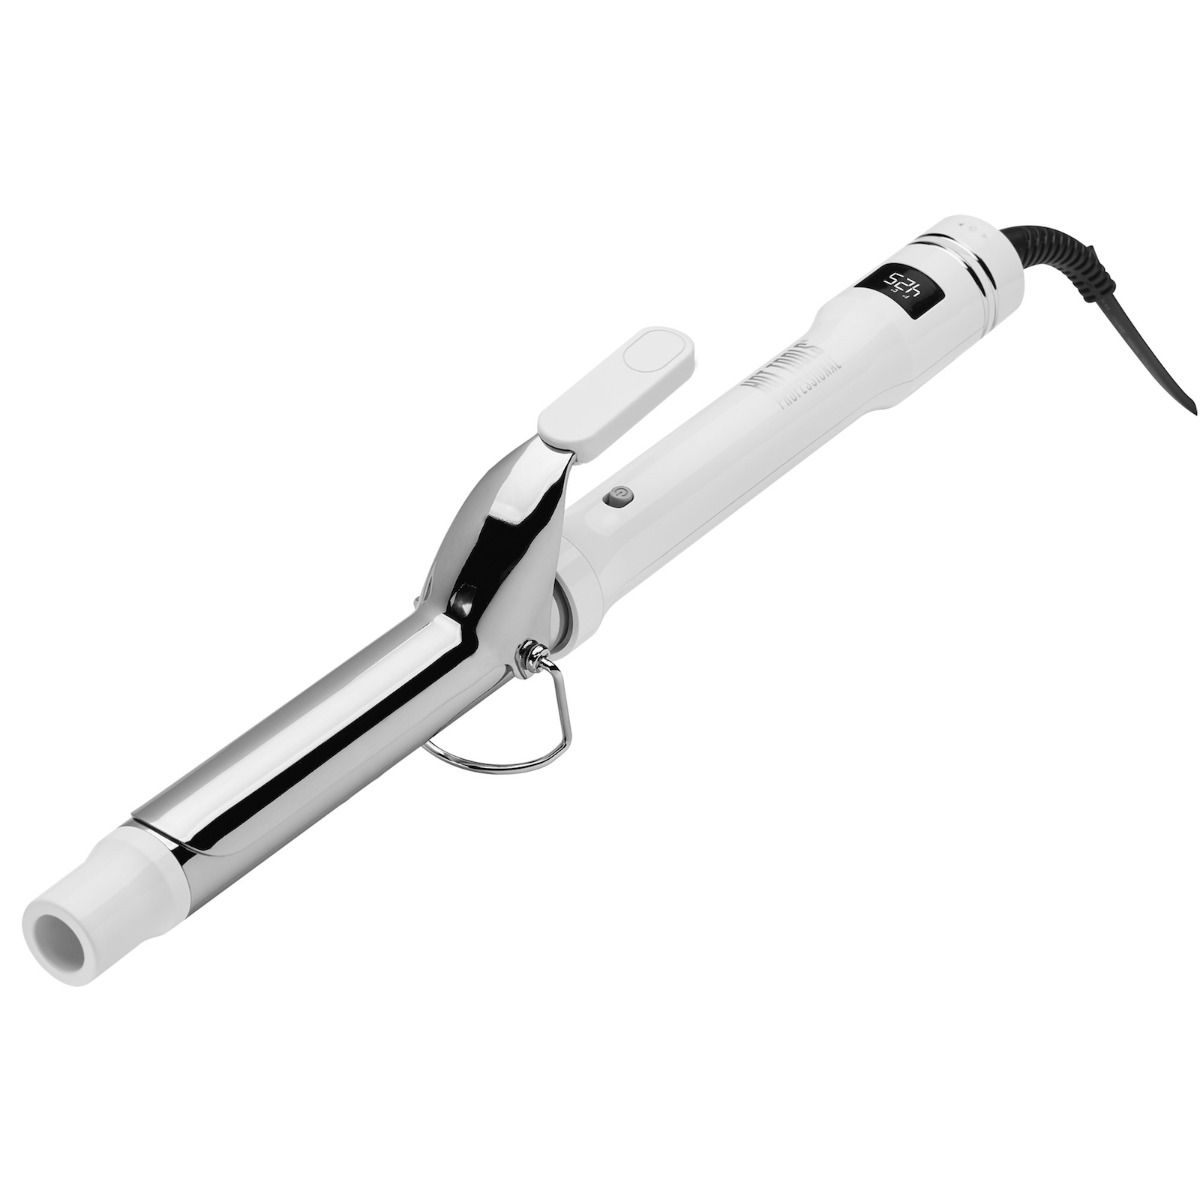 Hot Tools White Gold Collection Digital Curling Iron -1 INCH